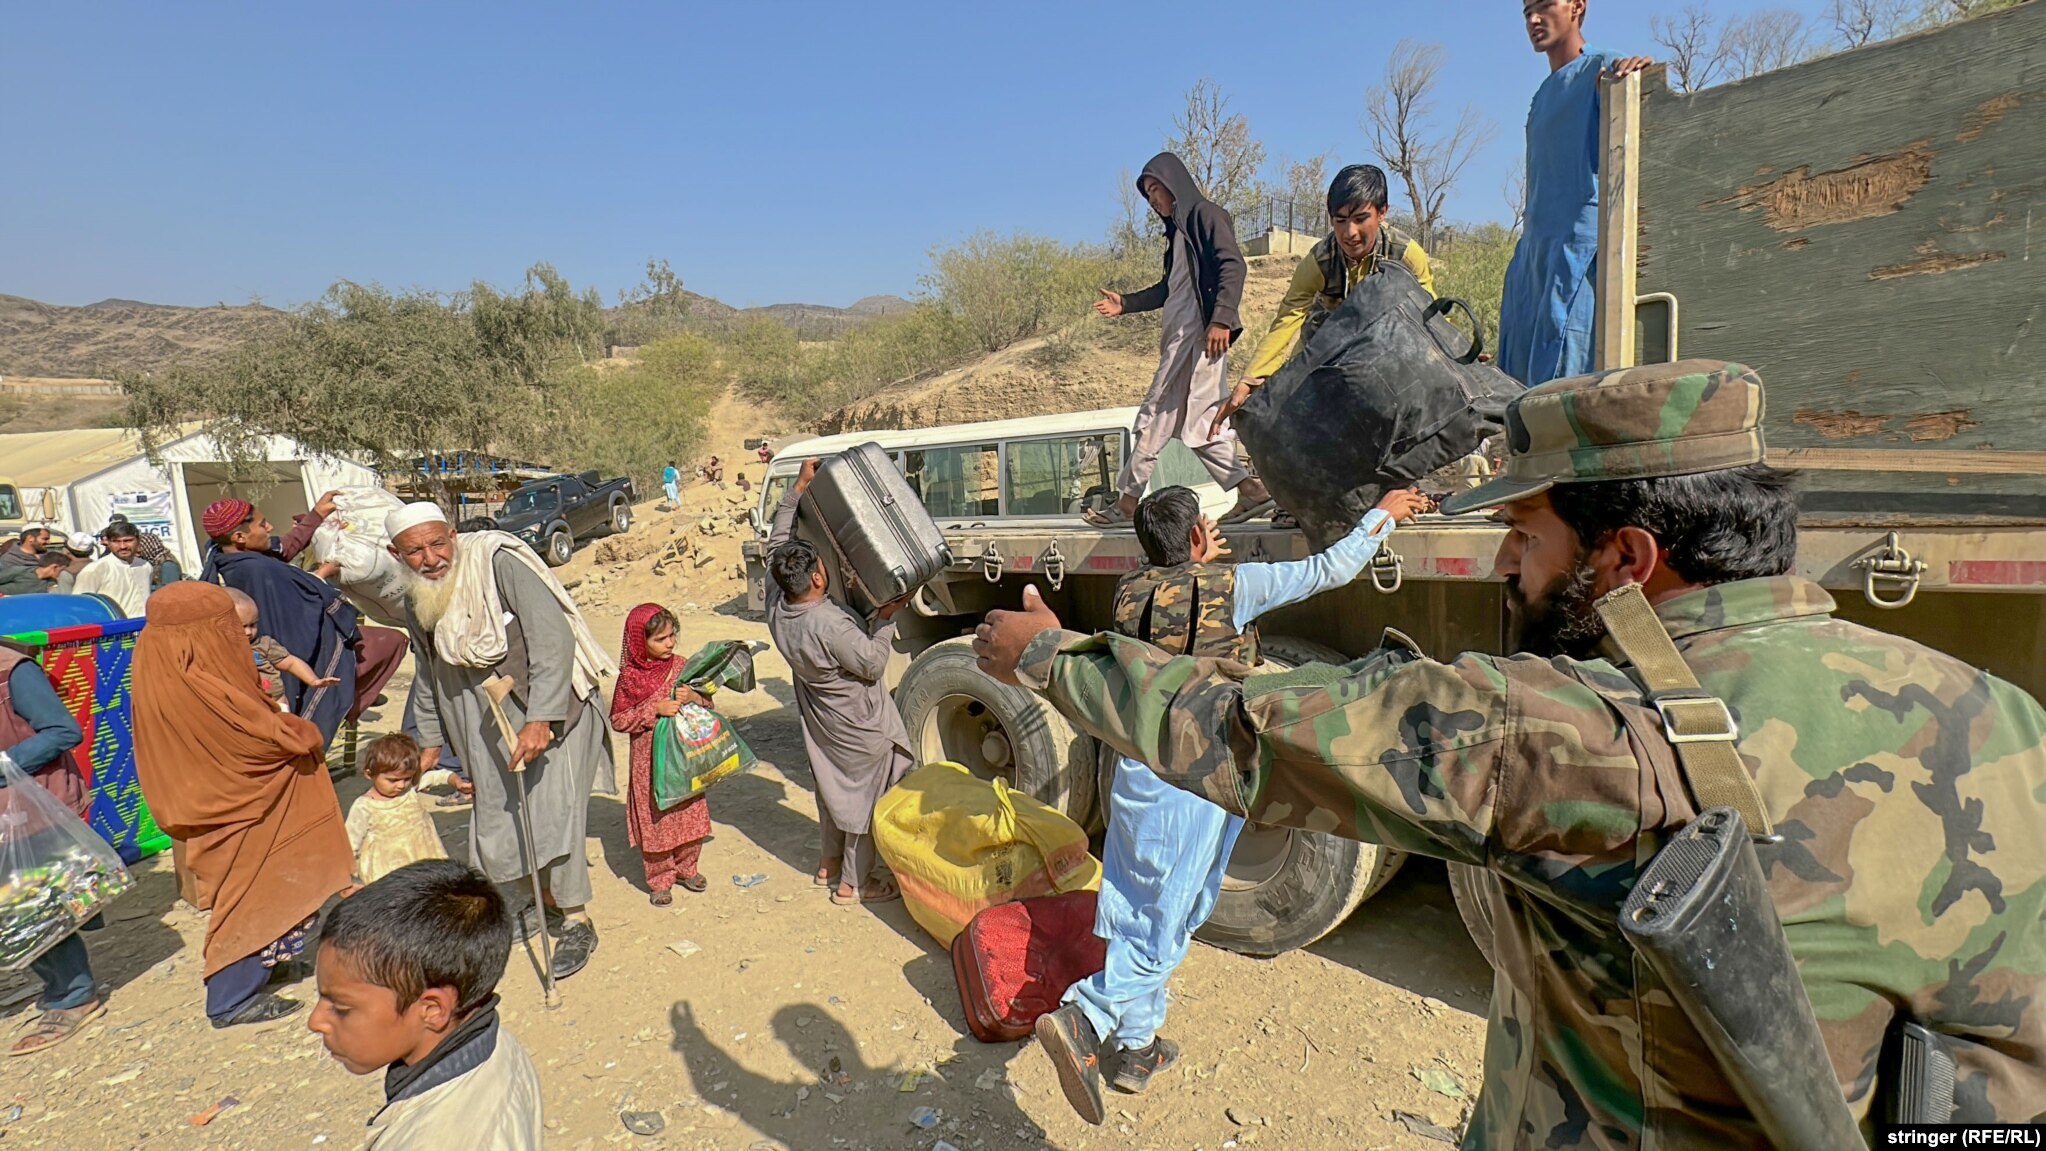 Taliban security personnel direct Afghan returnees after they crossed over into Afghanistan near the Torkham border crossing with Pakistan on November 5. An estimated 300,000 Afghans have fled Pakistan in recent weeks following Islamabad&#39;s order that 1.7 million undocumented refugees and migrants leave the South Asian country or face arrest or expulsion.